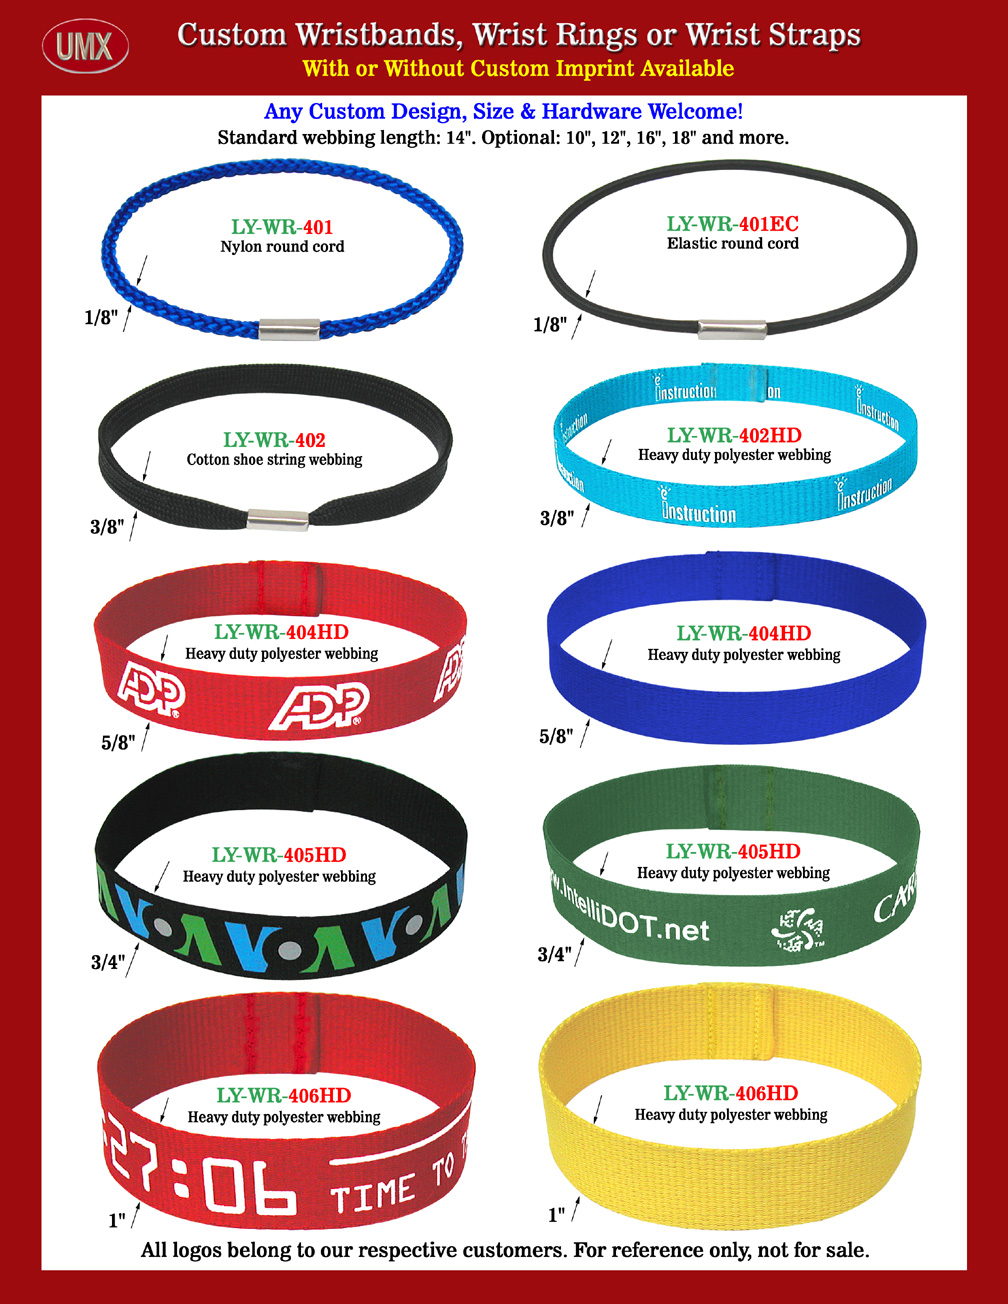 A General Introduction To Round Ring Wristband, Wrist Web Band, Bracelet and Wrist Strap Lanyards come with 1/8", 3/8", 5/8", 3/4" and 1" diameter or width of round cord or flat straps.